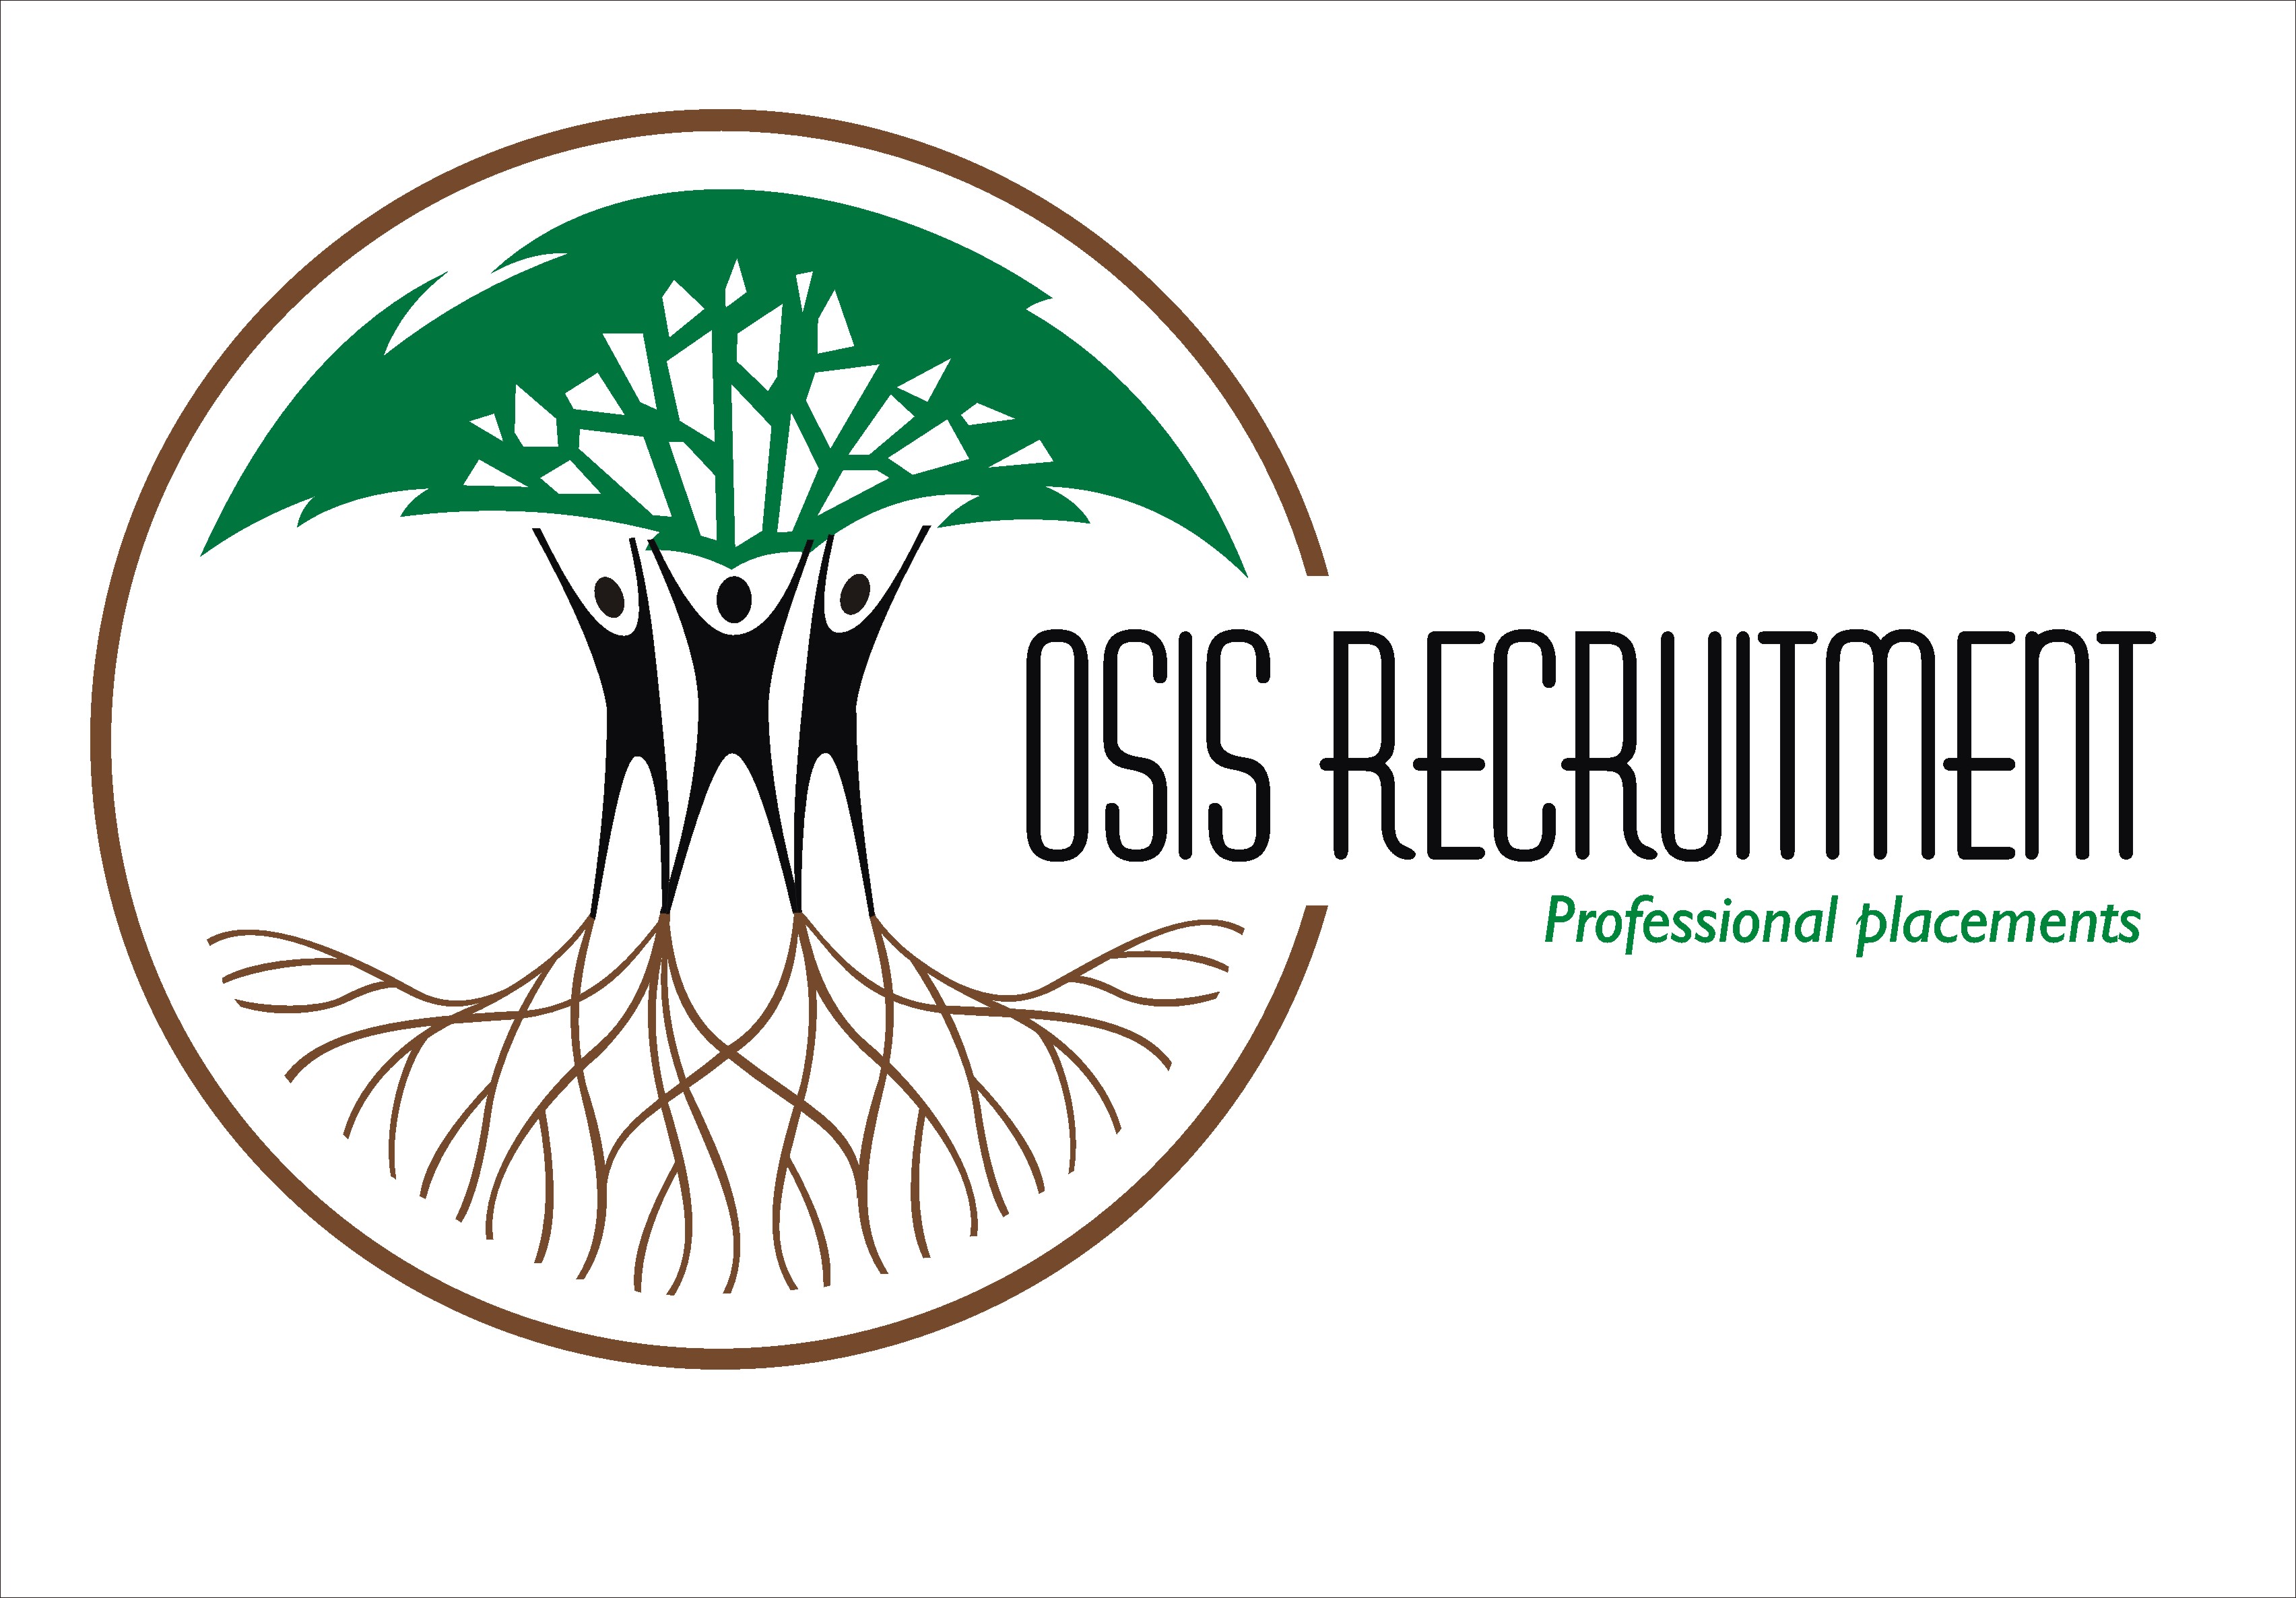 https://www.mncjobs.co.za/company/osis-recruitment